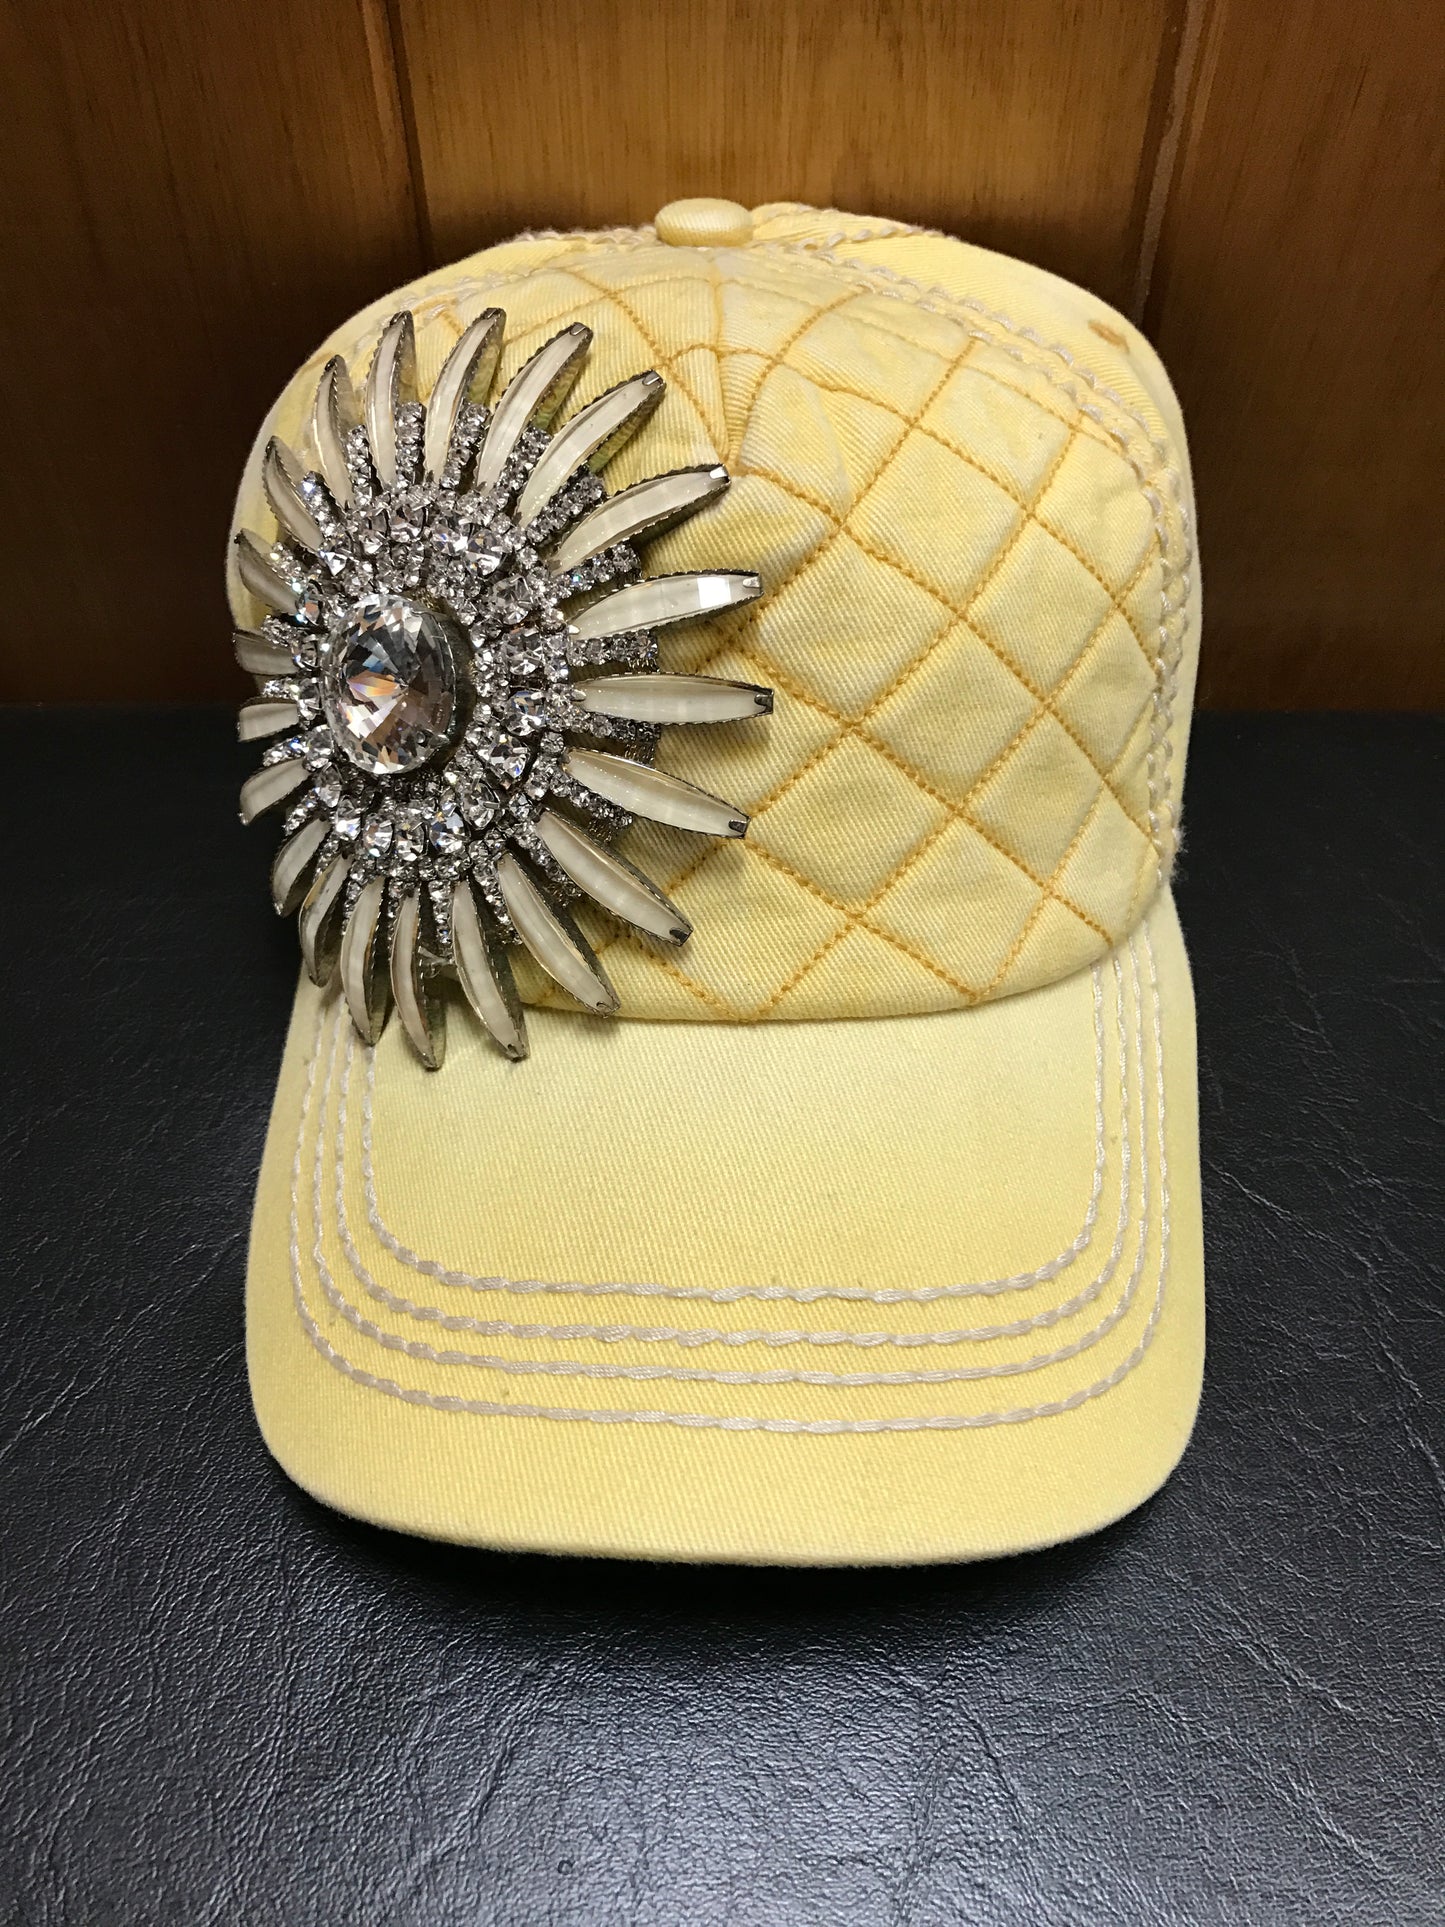 Olive & Pique Yellow Bling Flower Cap